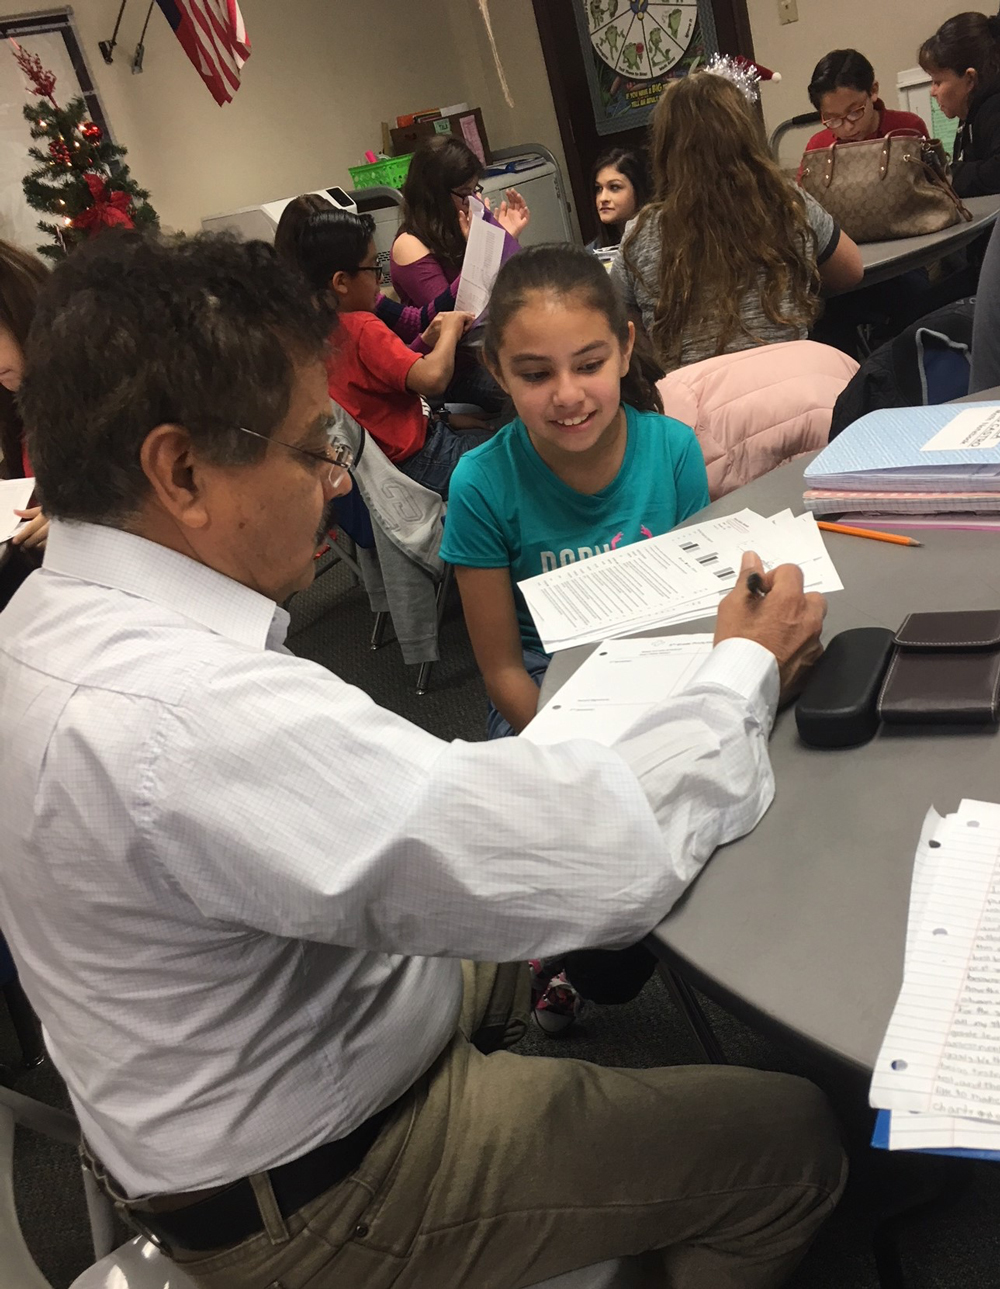 
Marbella Reyes (right) sets some goals with her father Marcos Reyes during Crockett Elementary’s recent Student Led Conferences. The conferences provided an opportunity for students to lead parents, district administrators and community members through discussions about their work and to establish academic and social goals.
